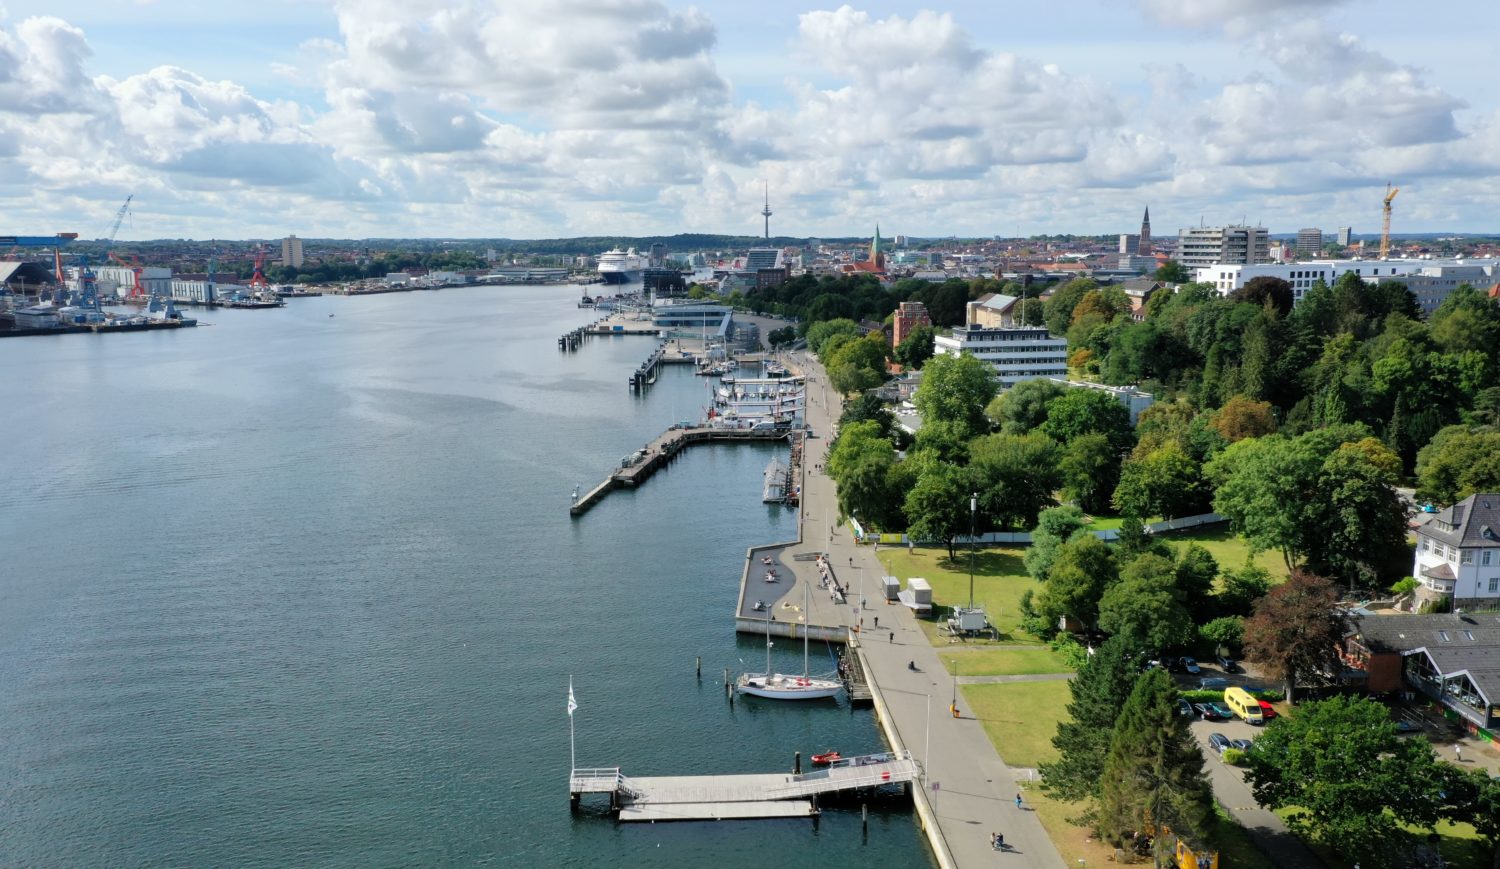 During the Kieler Woche you have a prominent view of passing sailboats from the Keillinie, the Kielier Promenade